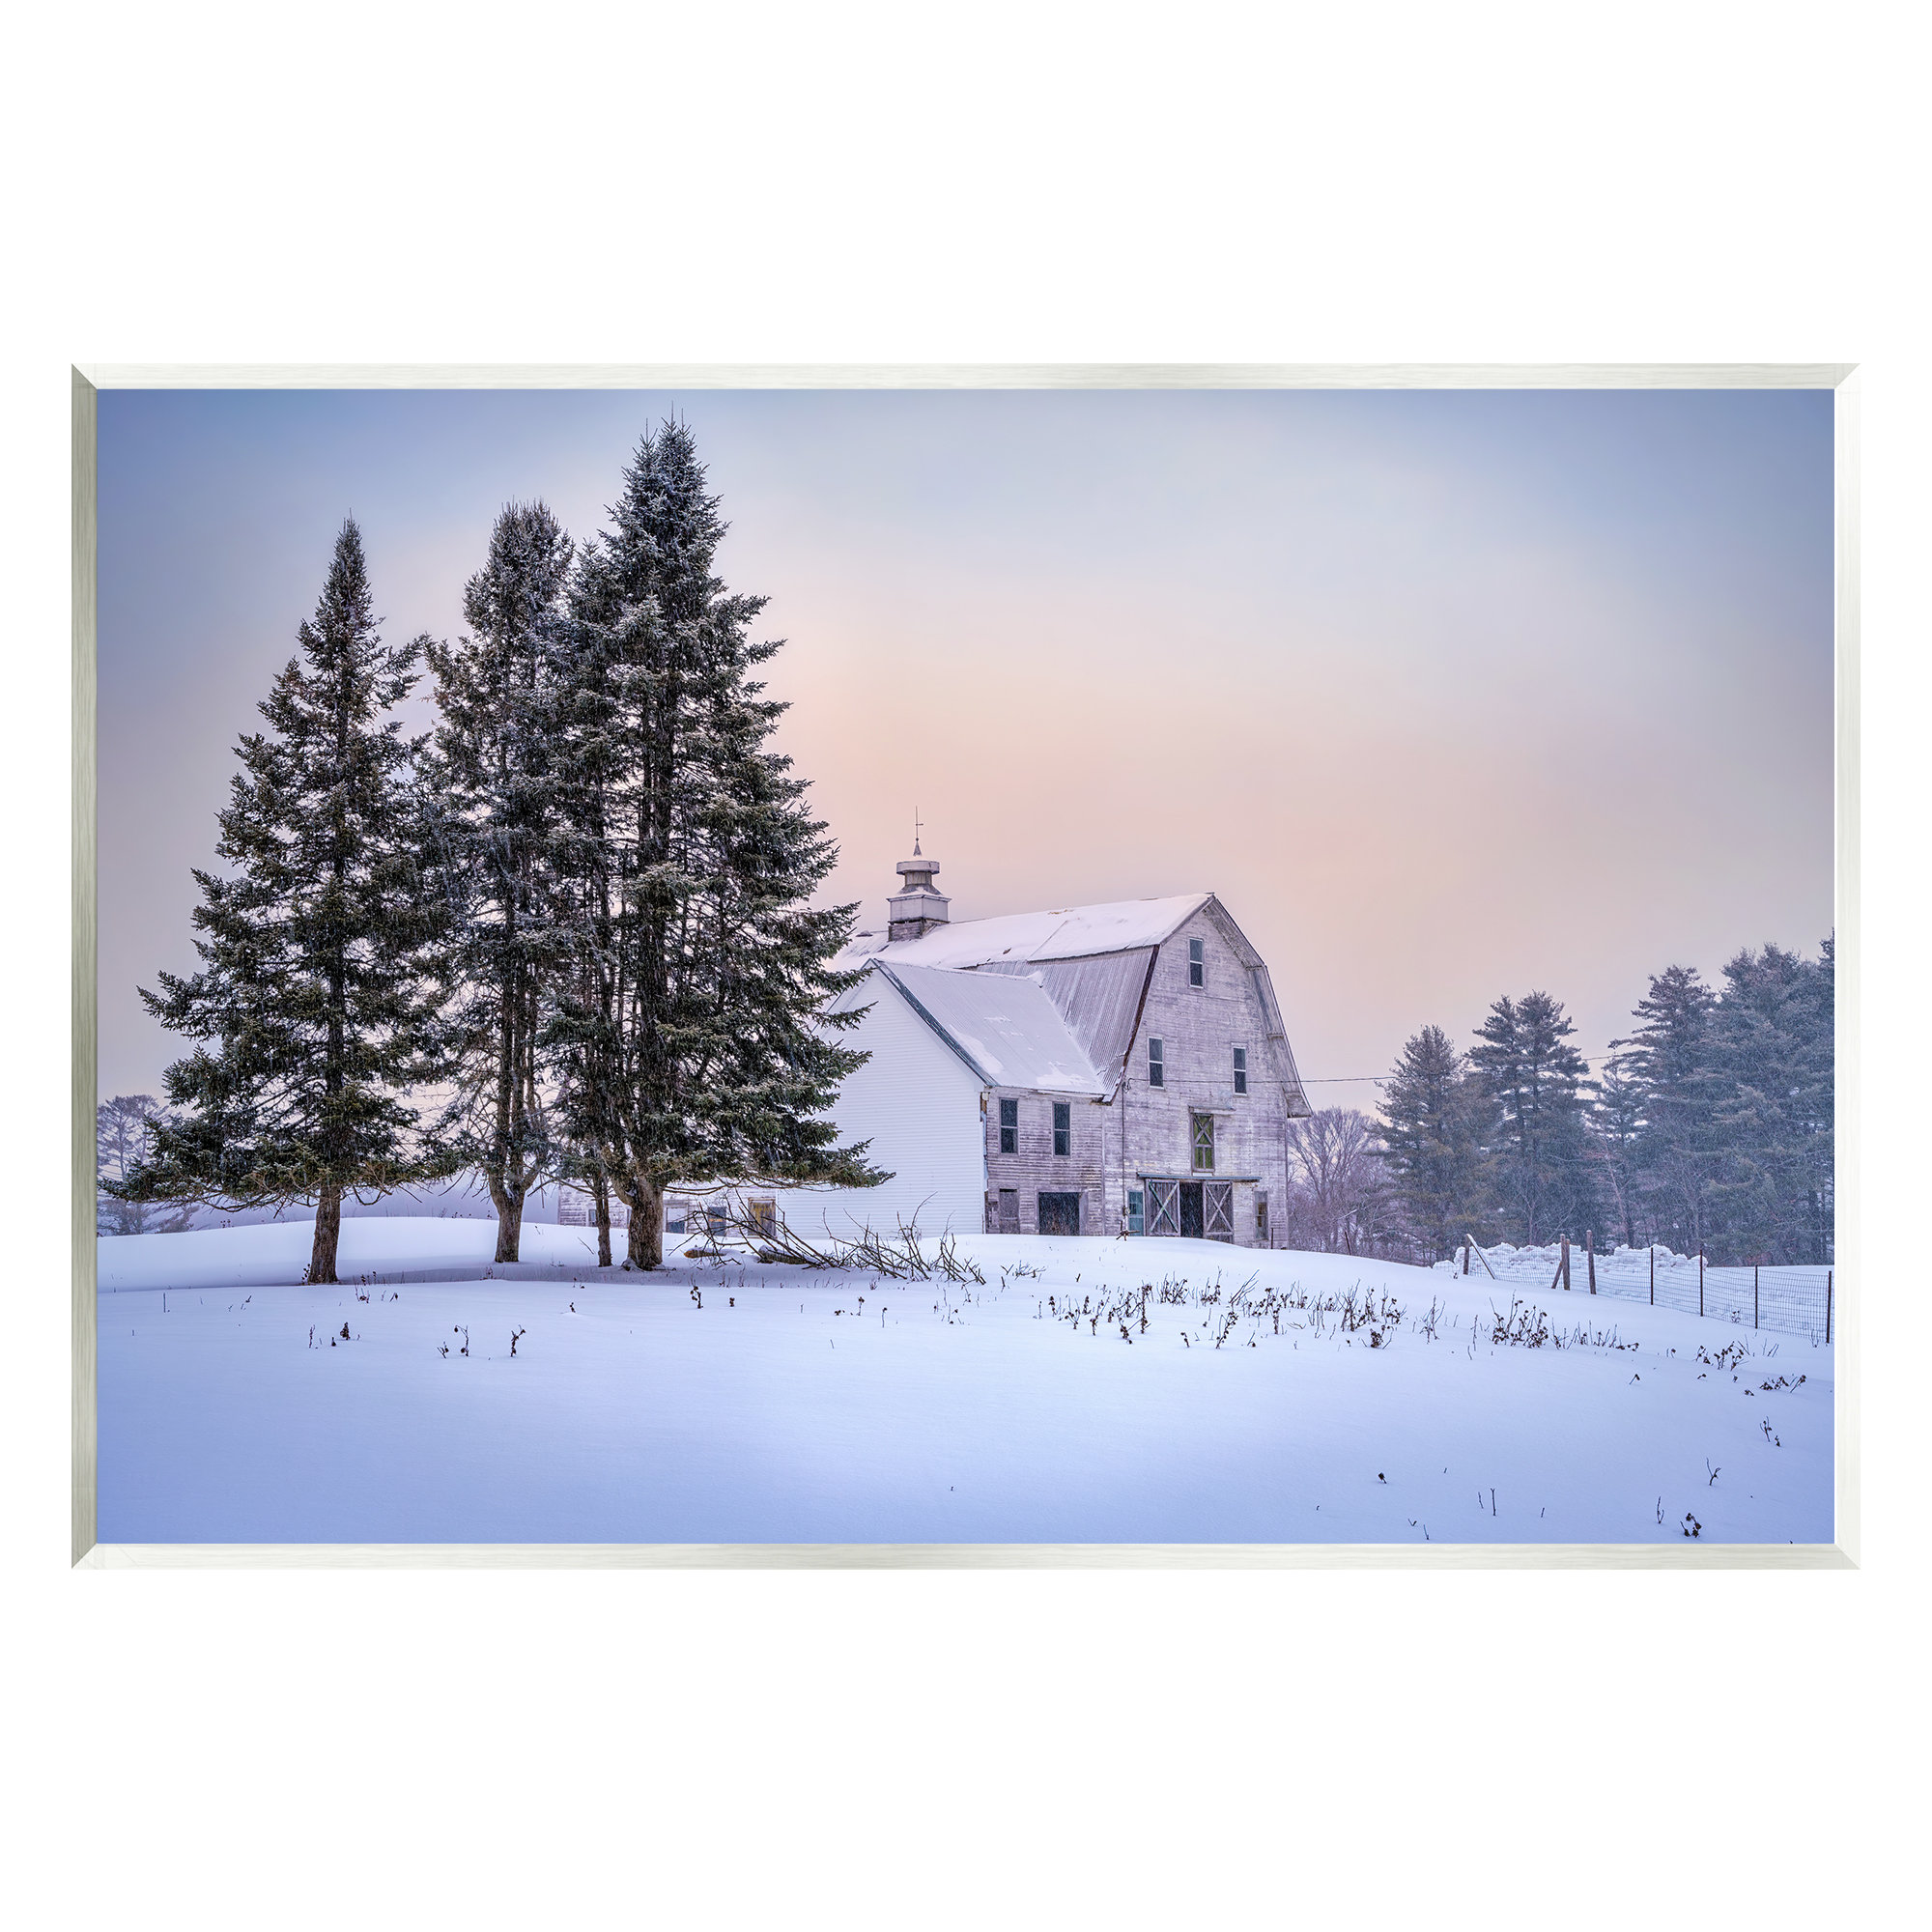 For now I am Winter - Landscape photography Outdoor Rug by Michael